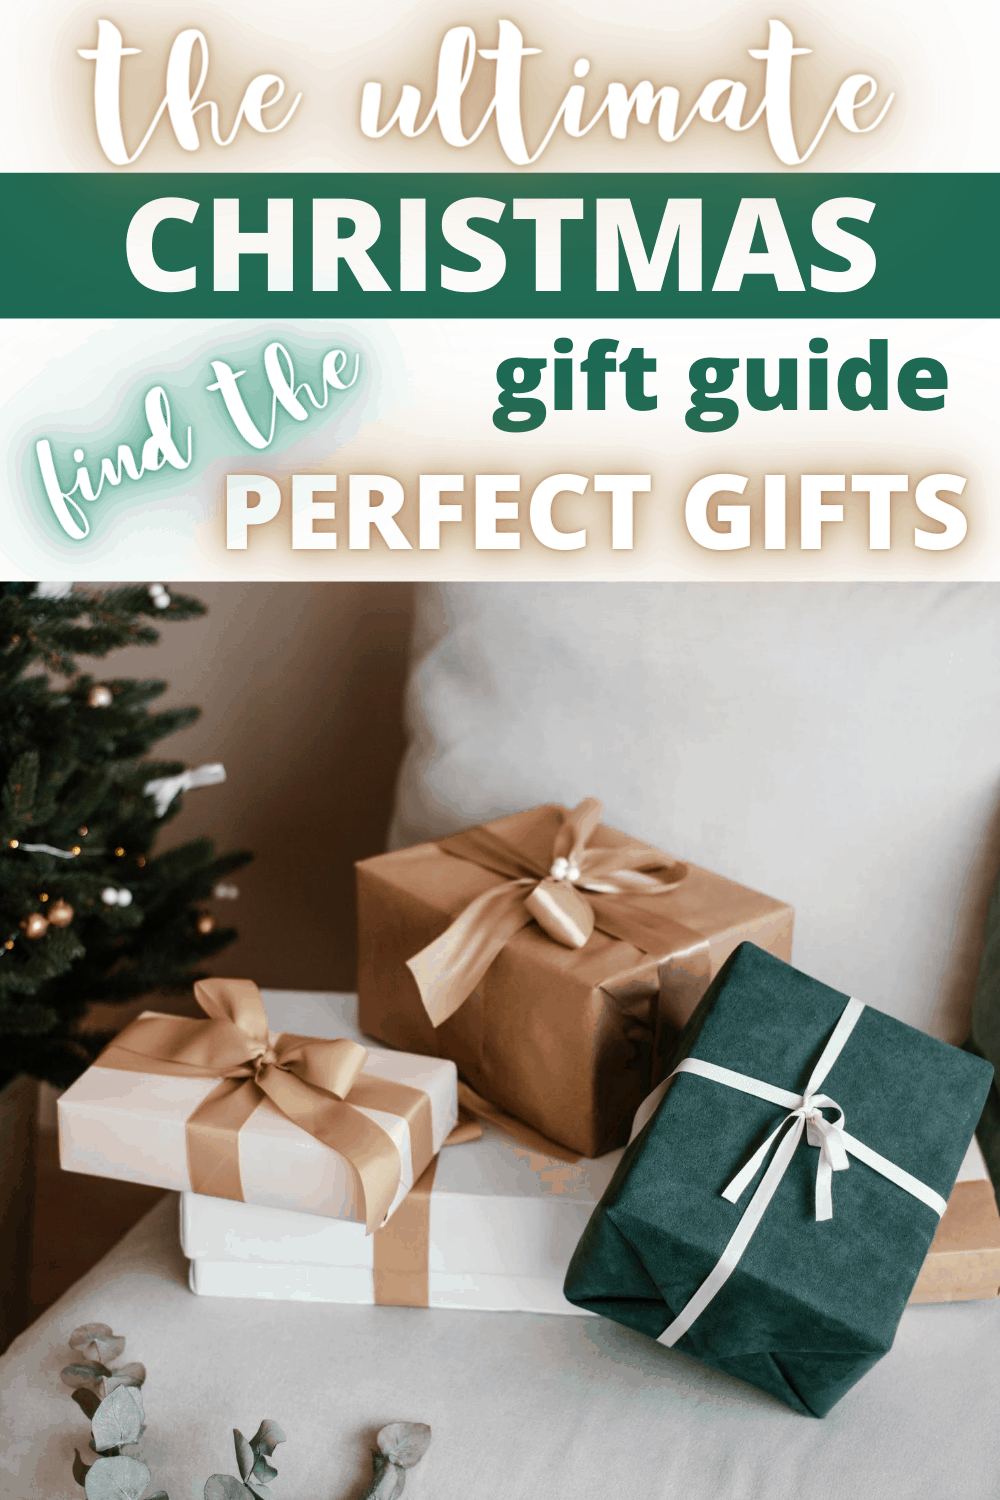 What Do They Want for Christmas? - 2020 Gift Guide - Healthy Wealthy Skinny